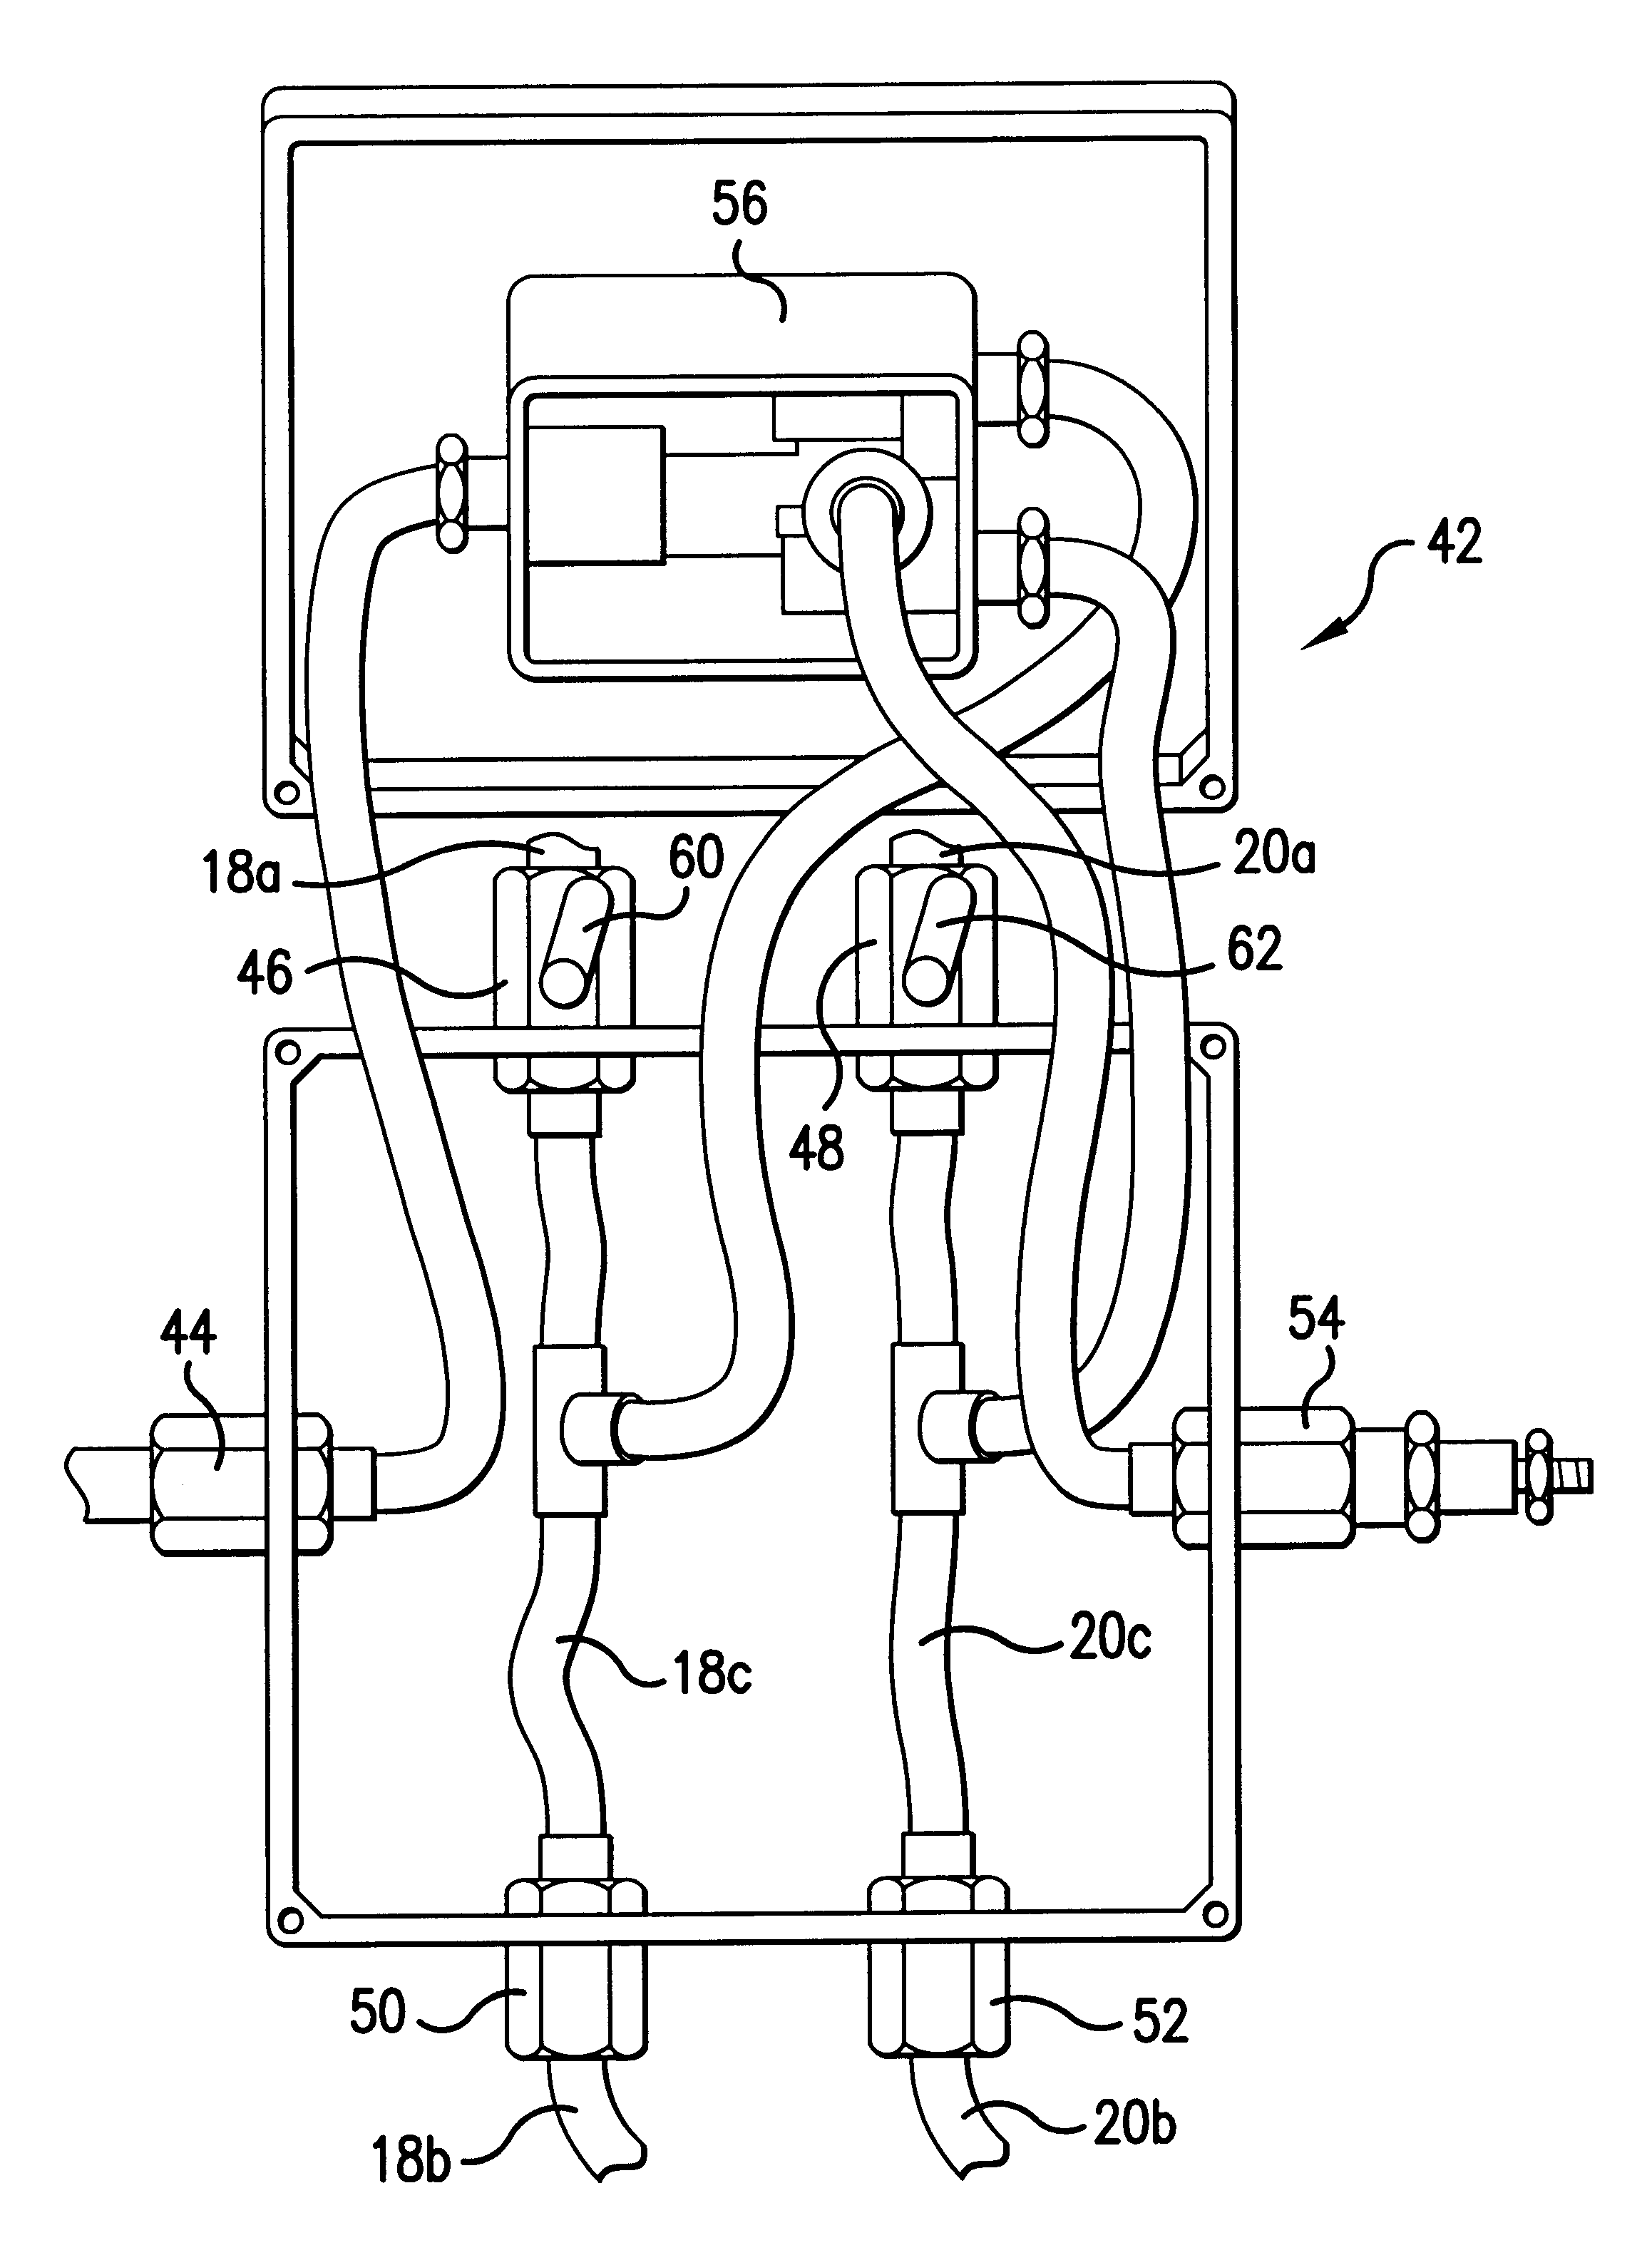 Automatic position-control valve assembly